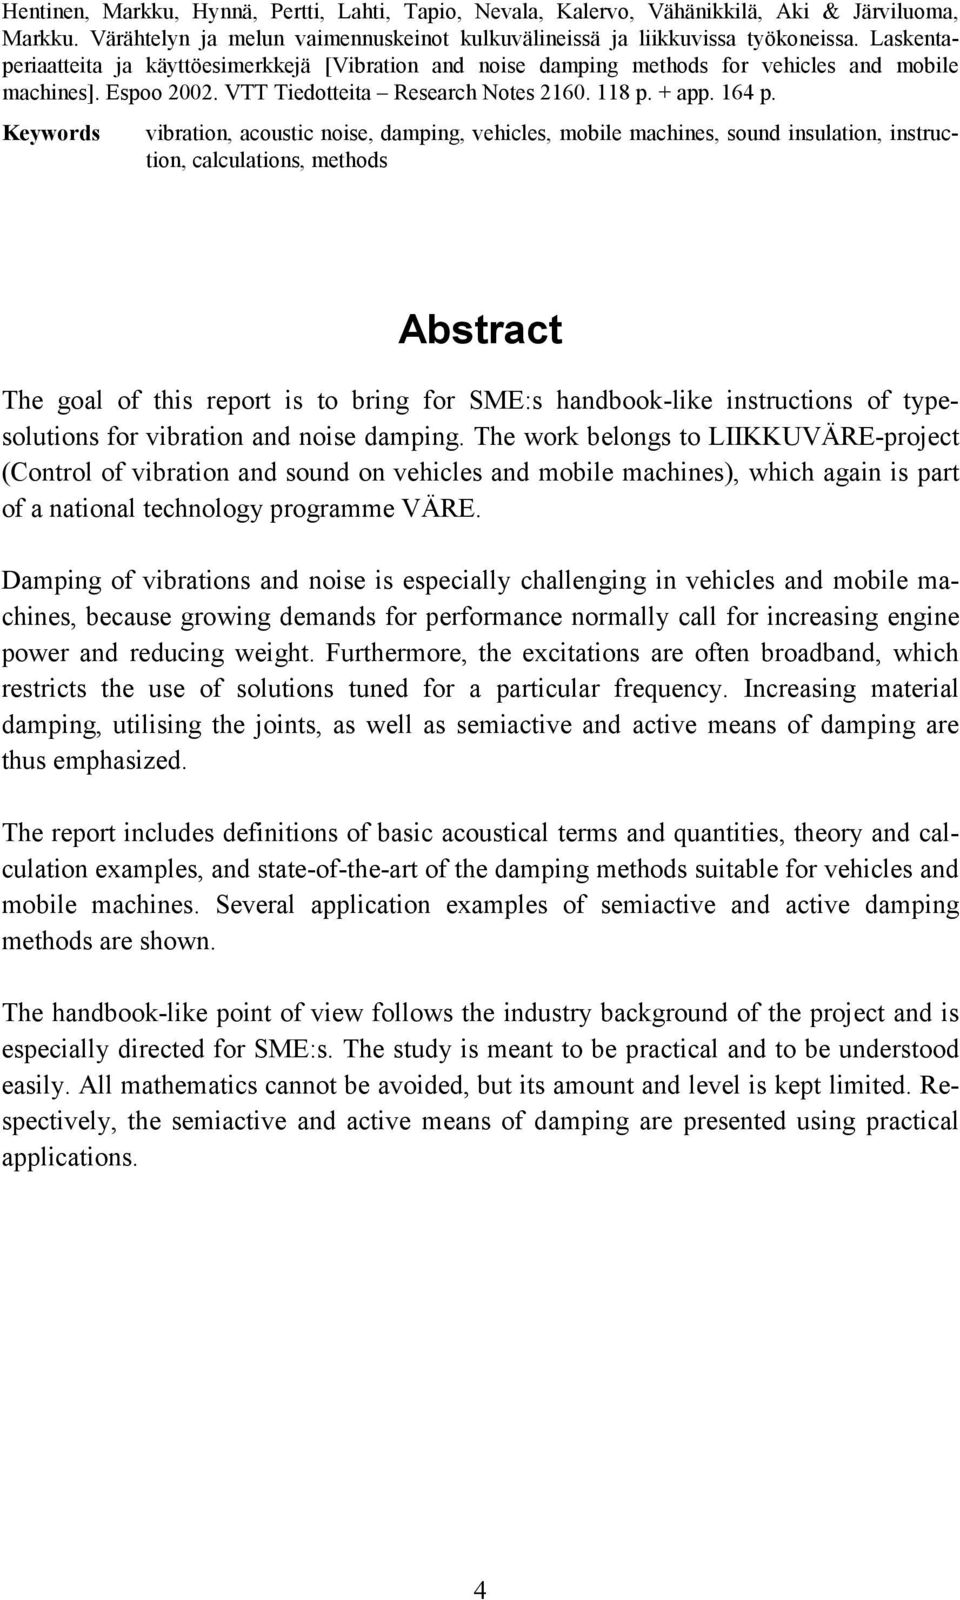 Keywords vibration, acoustic noise, damping, vehicles, mobile machines, sound insulation, instruction, calculations, methods Abstract The goal of this report is to bring for SME:s handbook-like